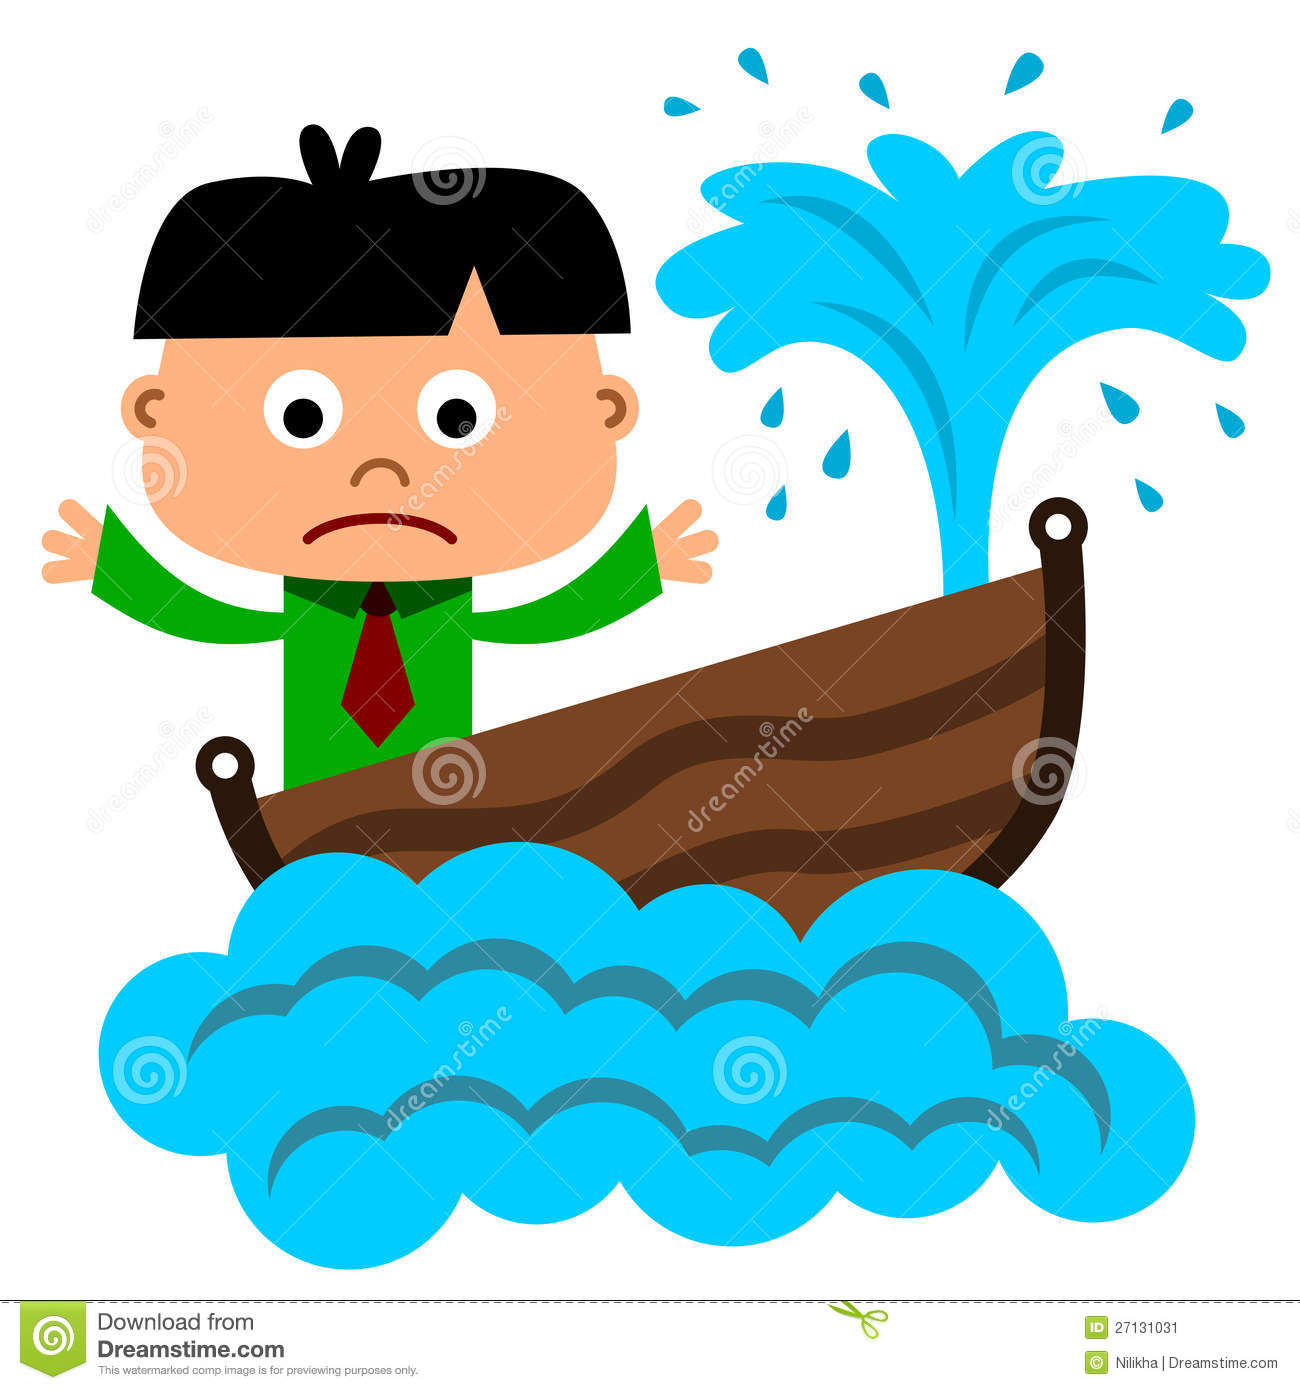 Humorous Illustration Of A Business Man Riding On A Sinking Boat